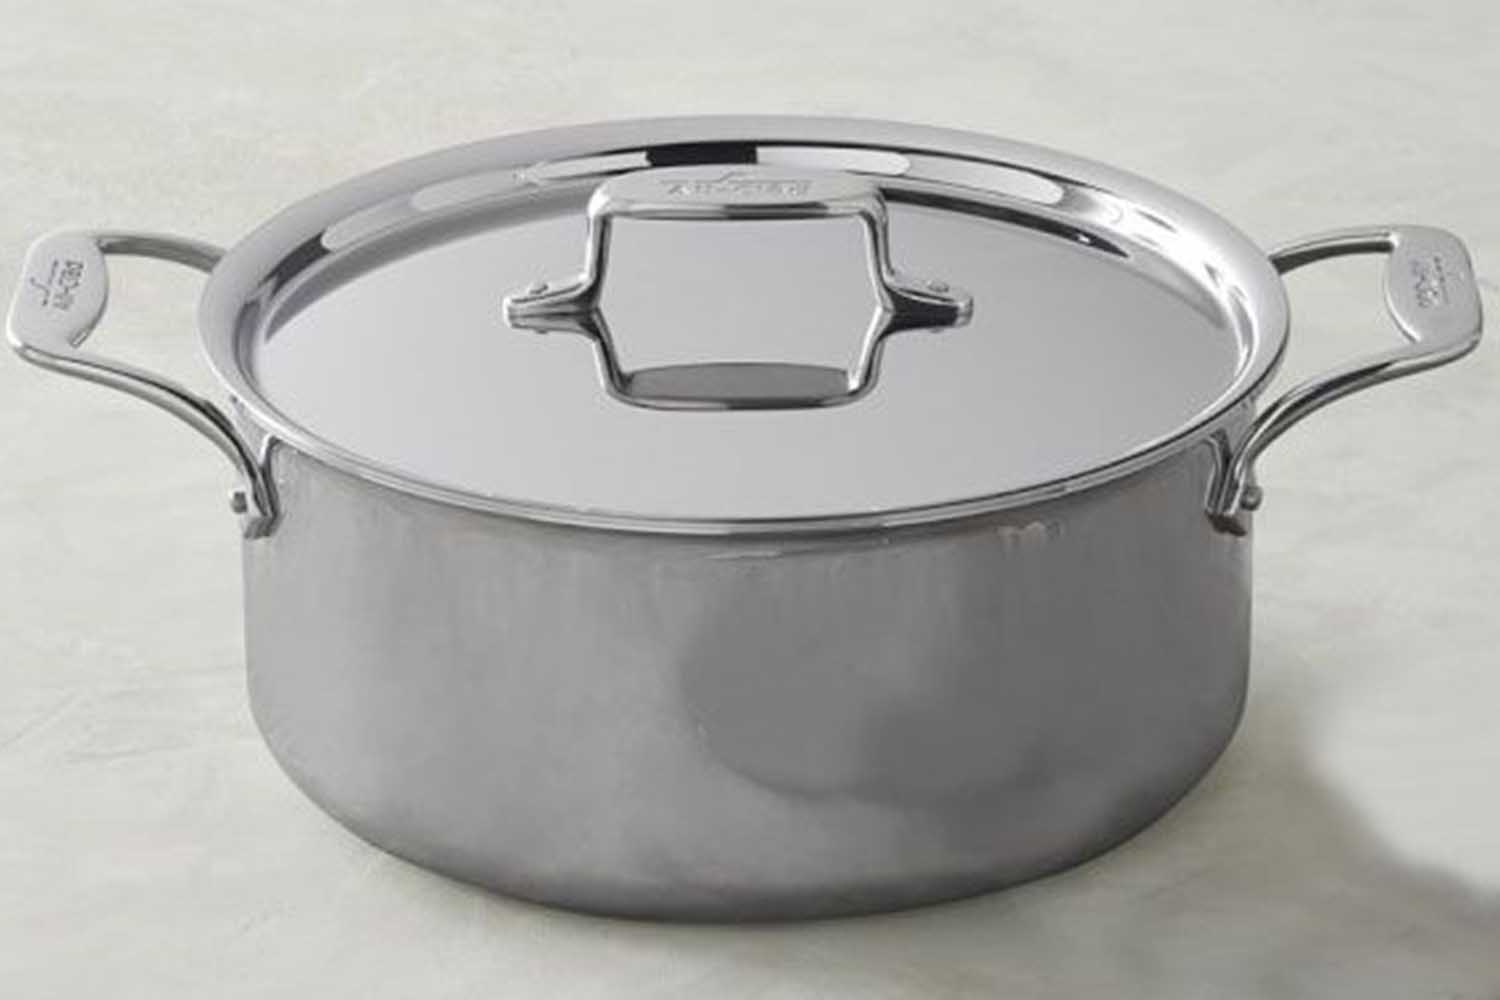 Grab Major Discounts During All-Clad Cookware's VIP Sale - InsideHook